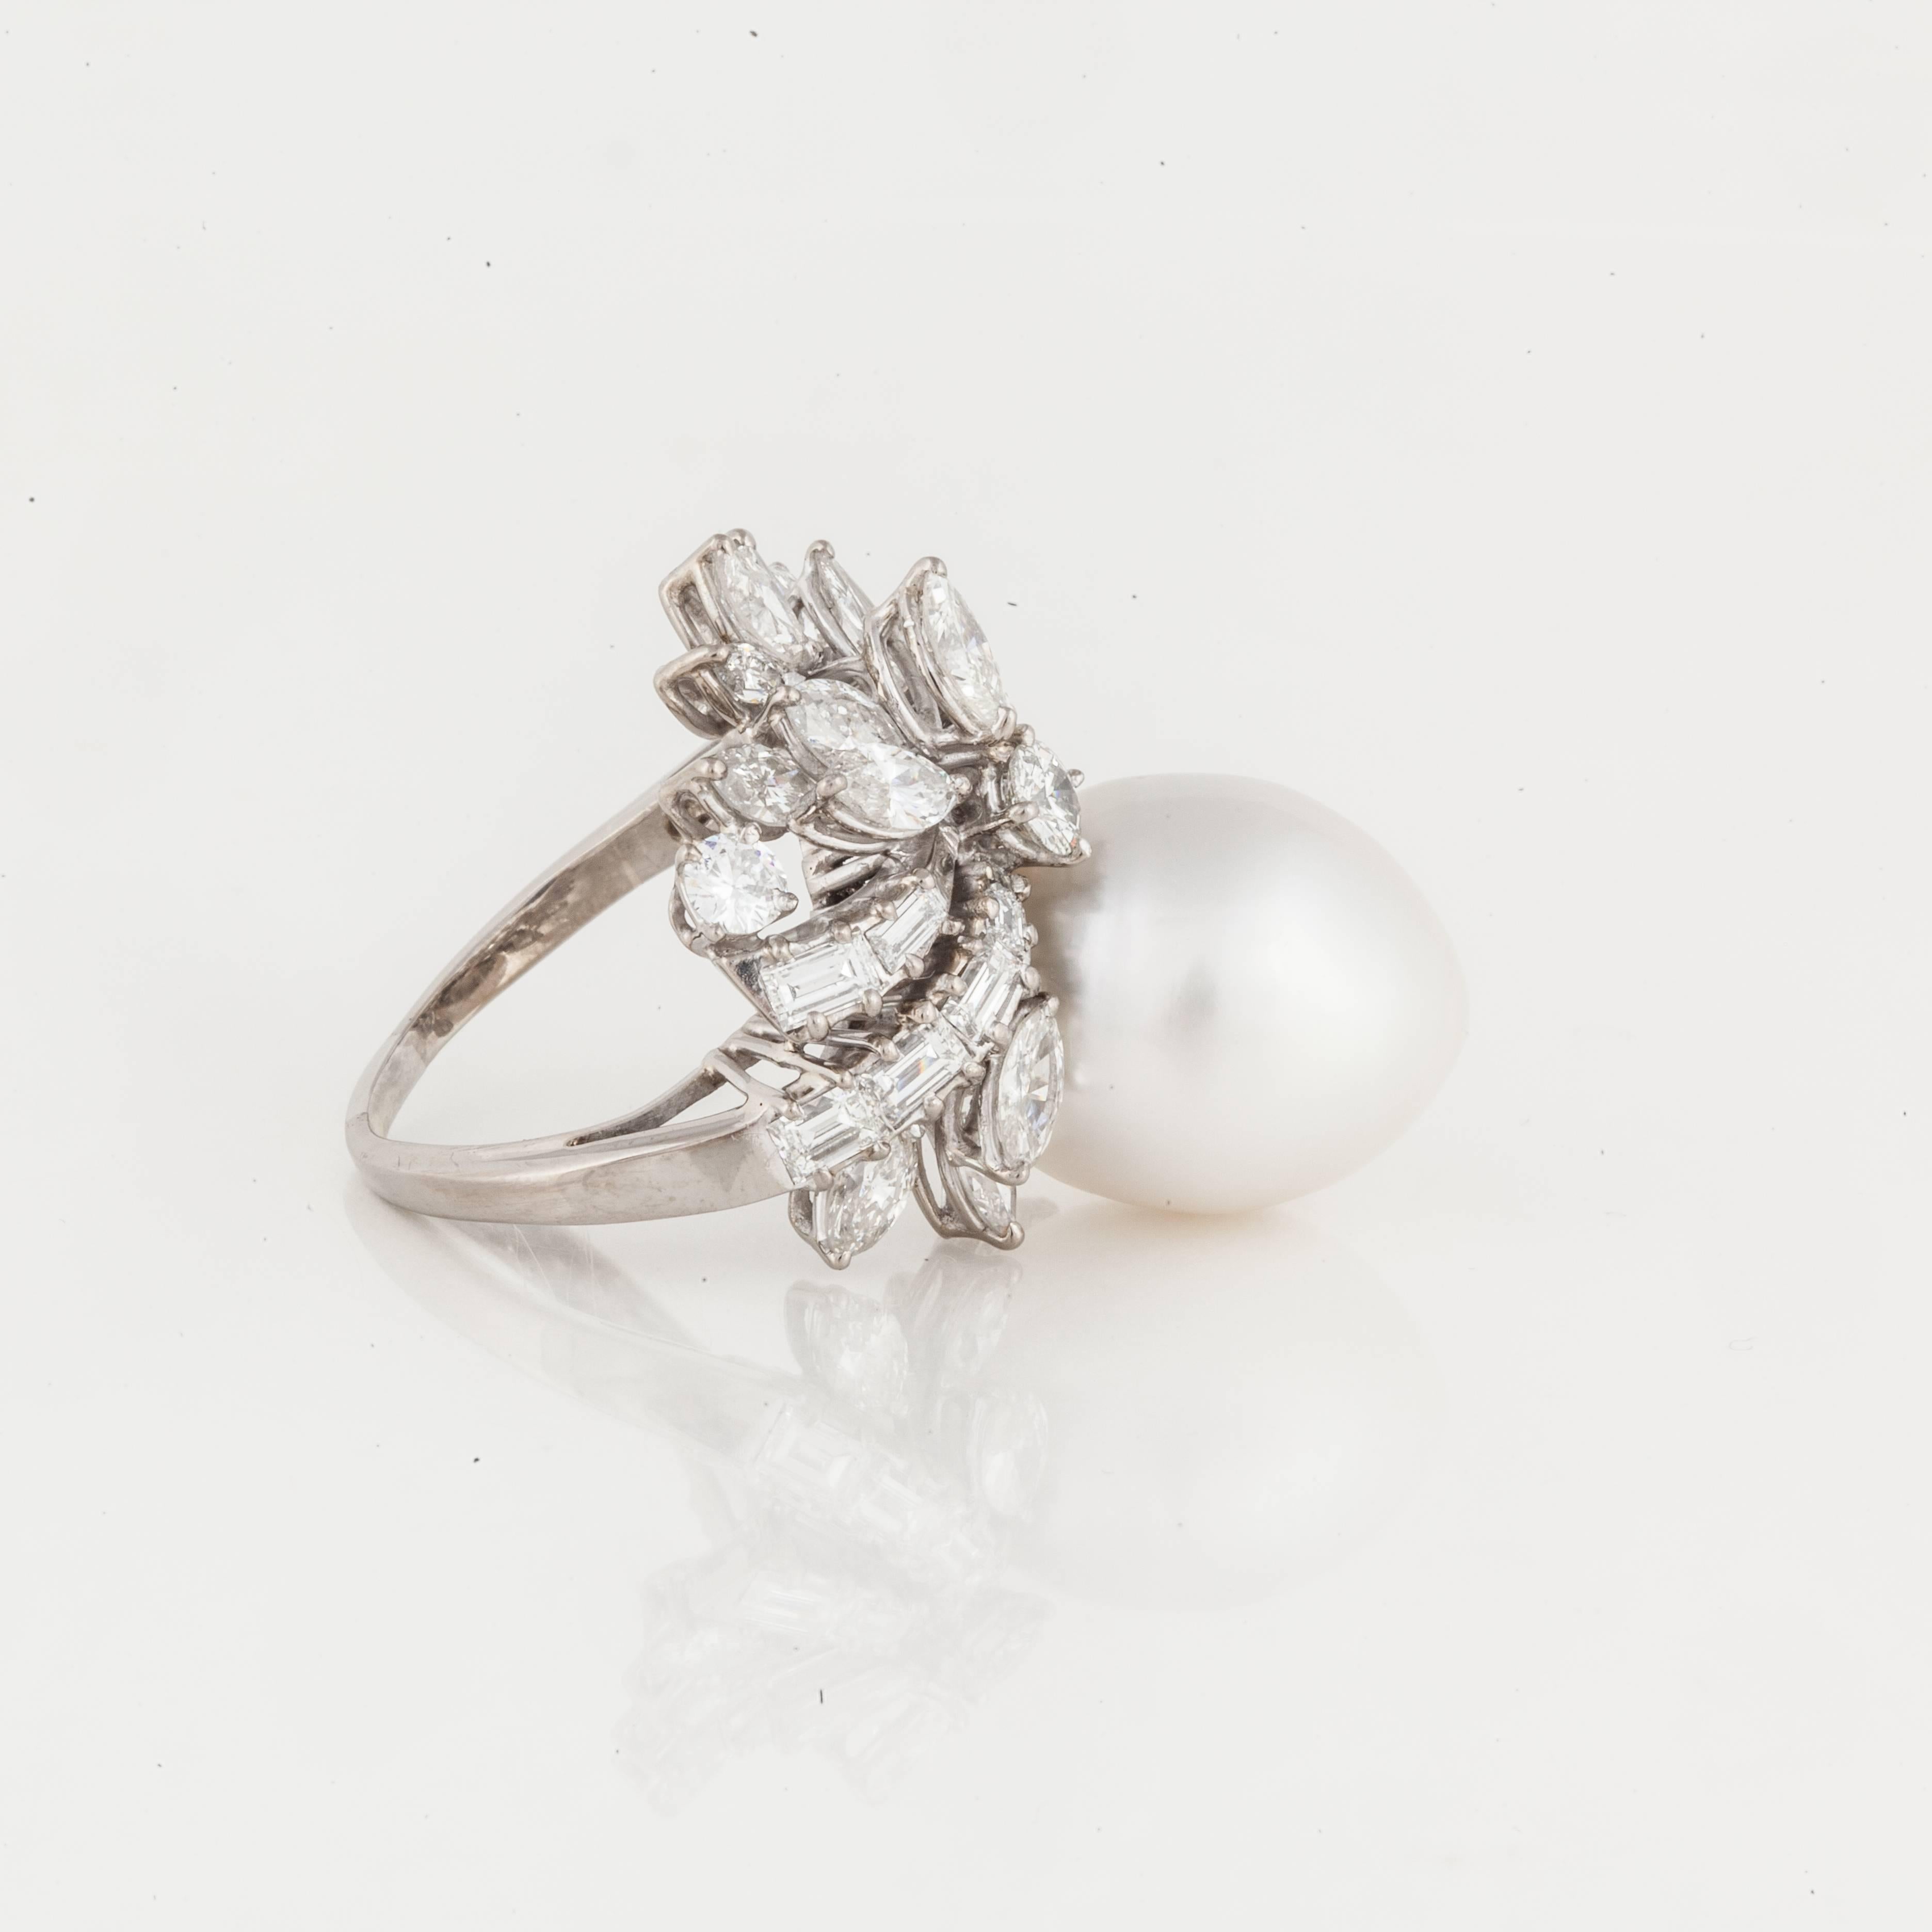 Ring composed of palladium featuring a cultured pearl and diamonds. The cultured pearl measures 18.5mm by 9.0mm.  There are 14 marquise, 15 emerald/baguette and two round diamonds totaling 3.25 carats; H-I color and VS clarity.  Measures 1 1/8